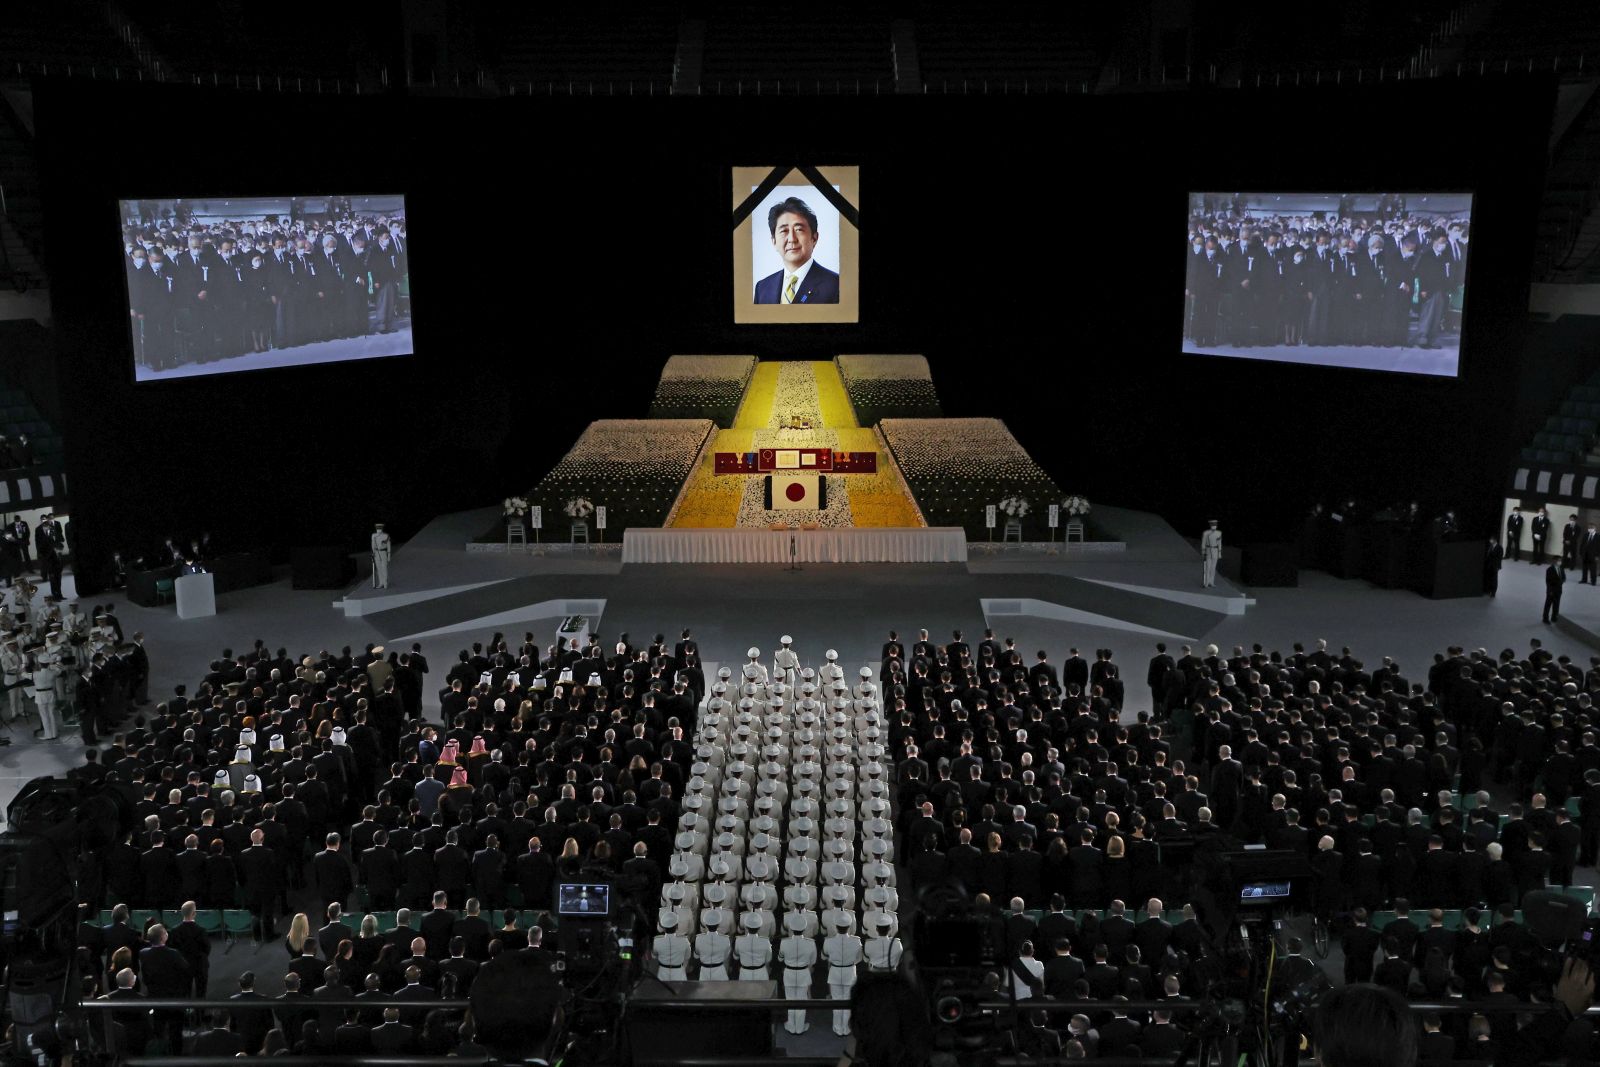 epa10208645 A view of the stage during the state funeral of former Japanese Prime Minister Shinzo Abe at the Nippon Budokan in Tokyo, Japan, 27 September 2022. Thousands of people are gathered in Tokyo to attend the state funeral for former prime minister Shinzo Abe, including foreign dignitaries and representatives from more than 200 countries and international organizations.  EPA/TAKASHI AOYAMA / POOL